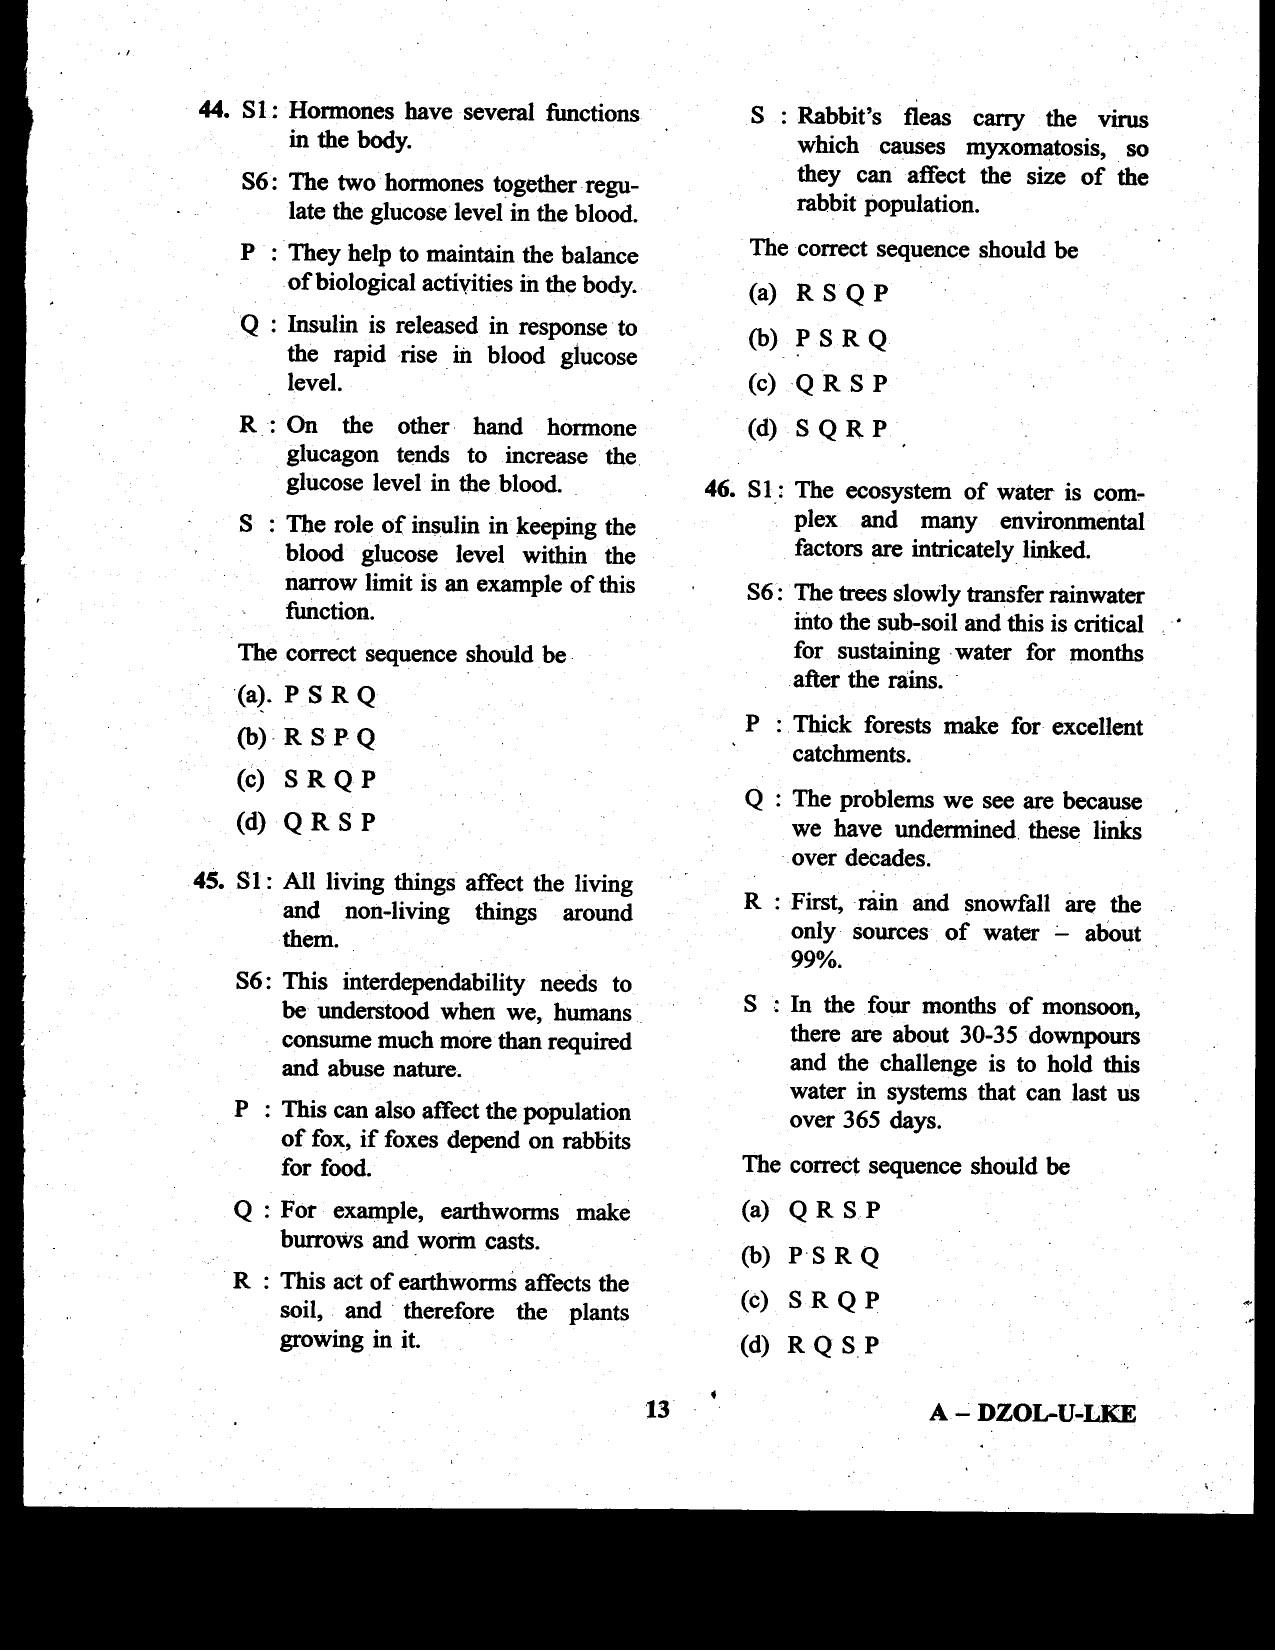 CDS II Examination 2020 English Question Paper - Image 13